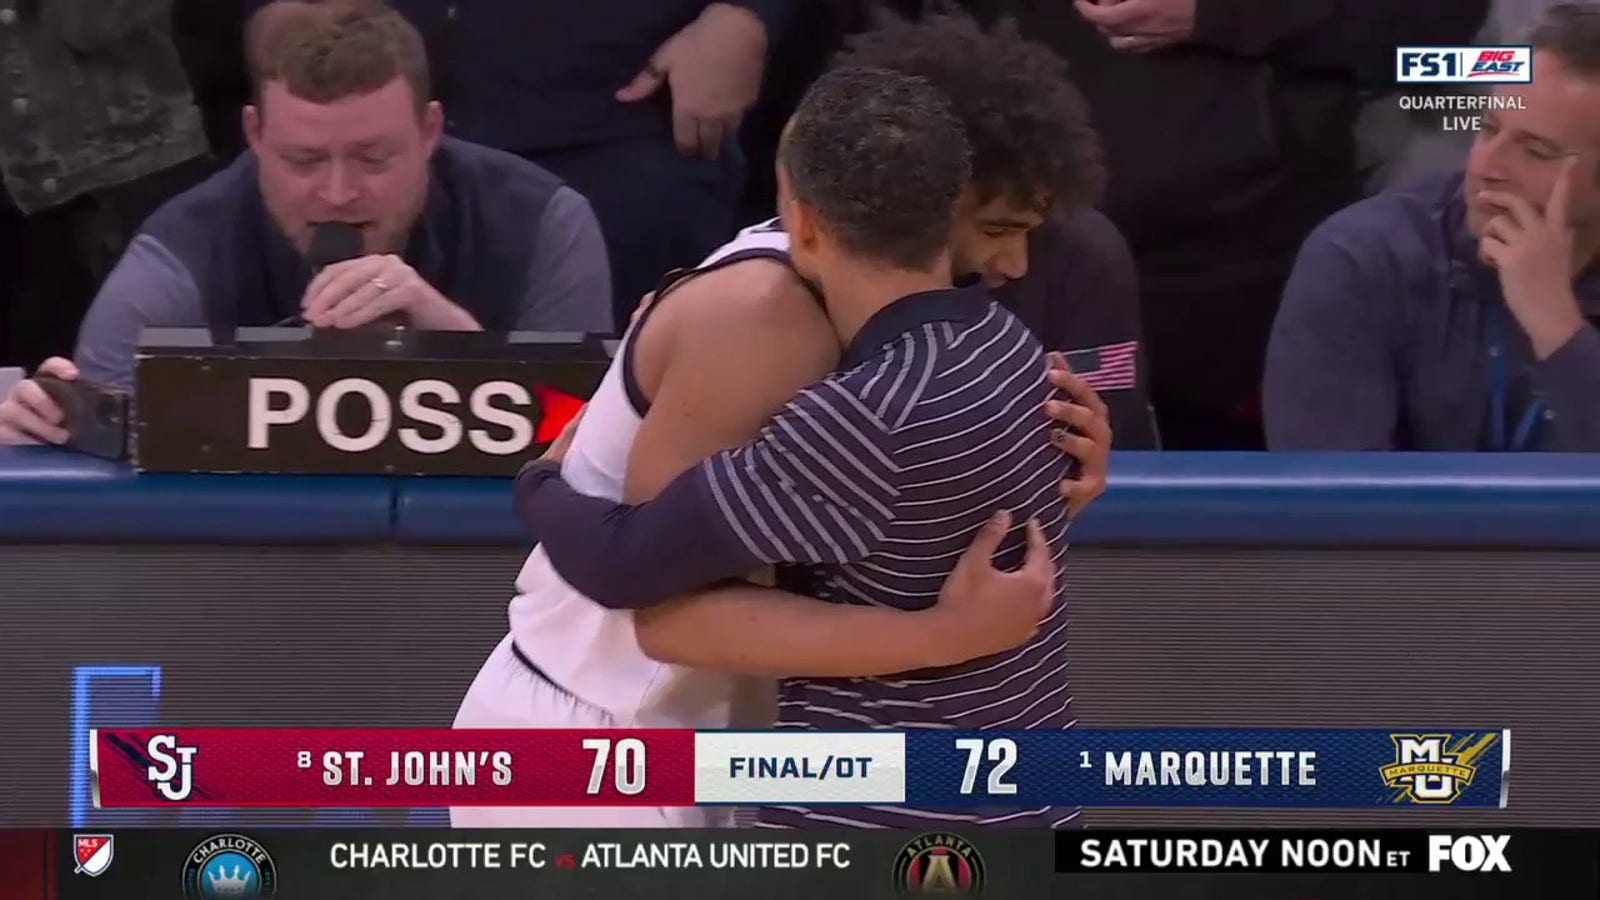 Marquette defeats St. John's in overtime